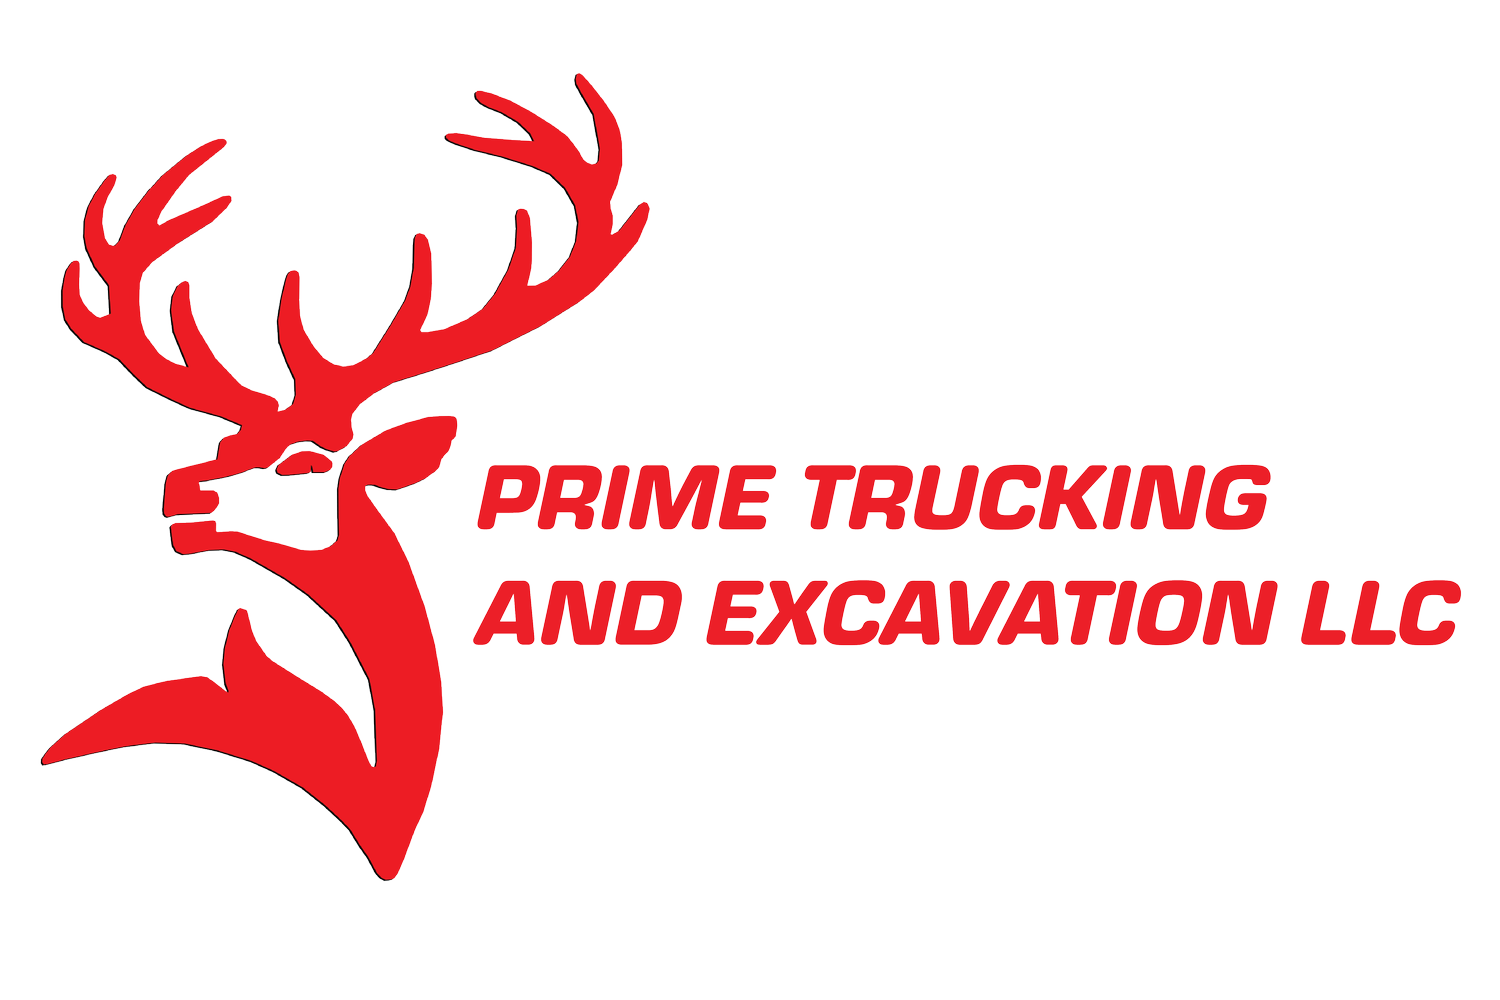 Prime Trucking and Excavation